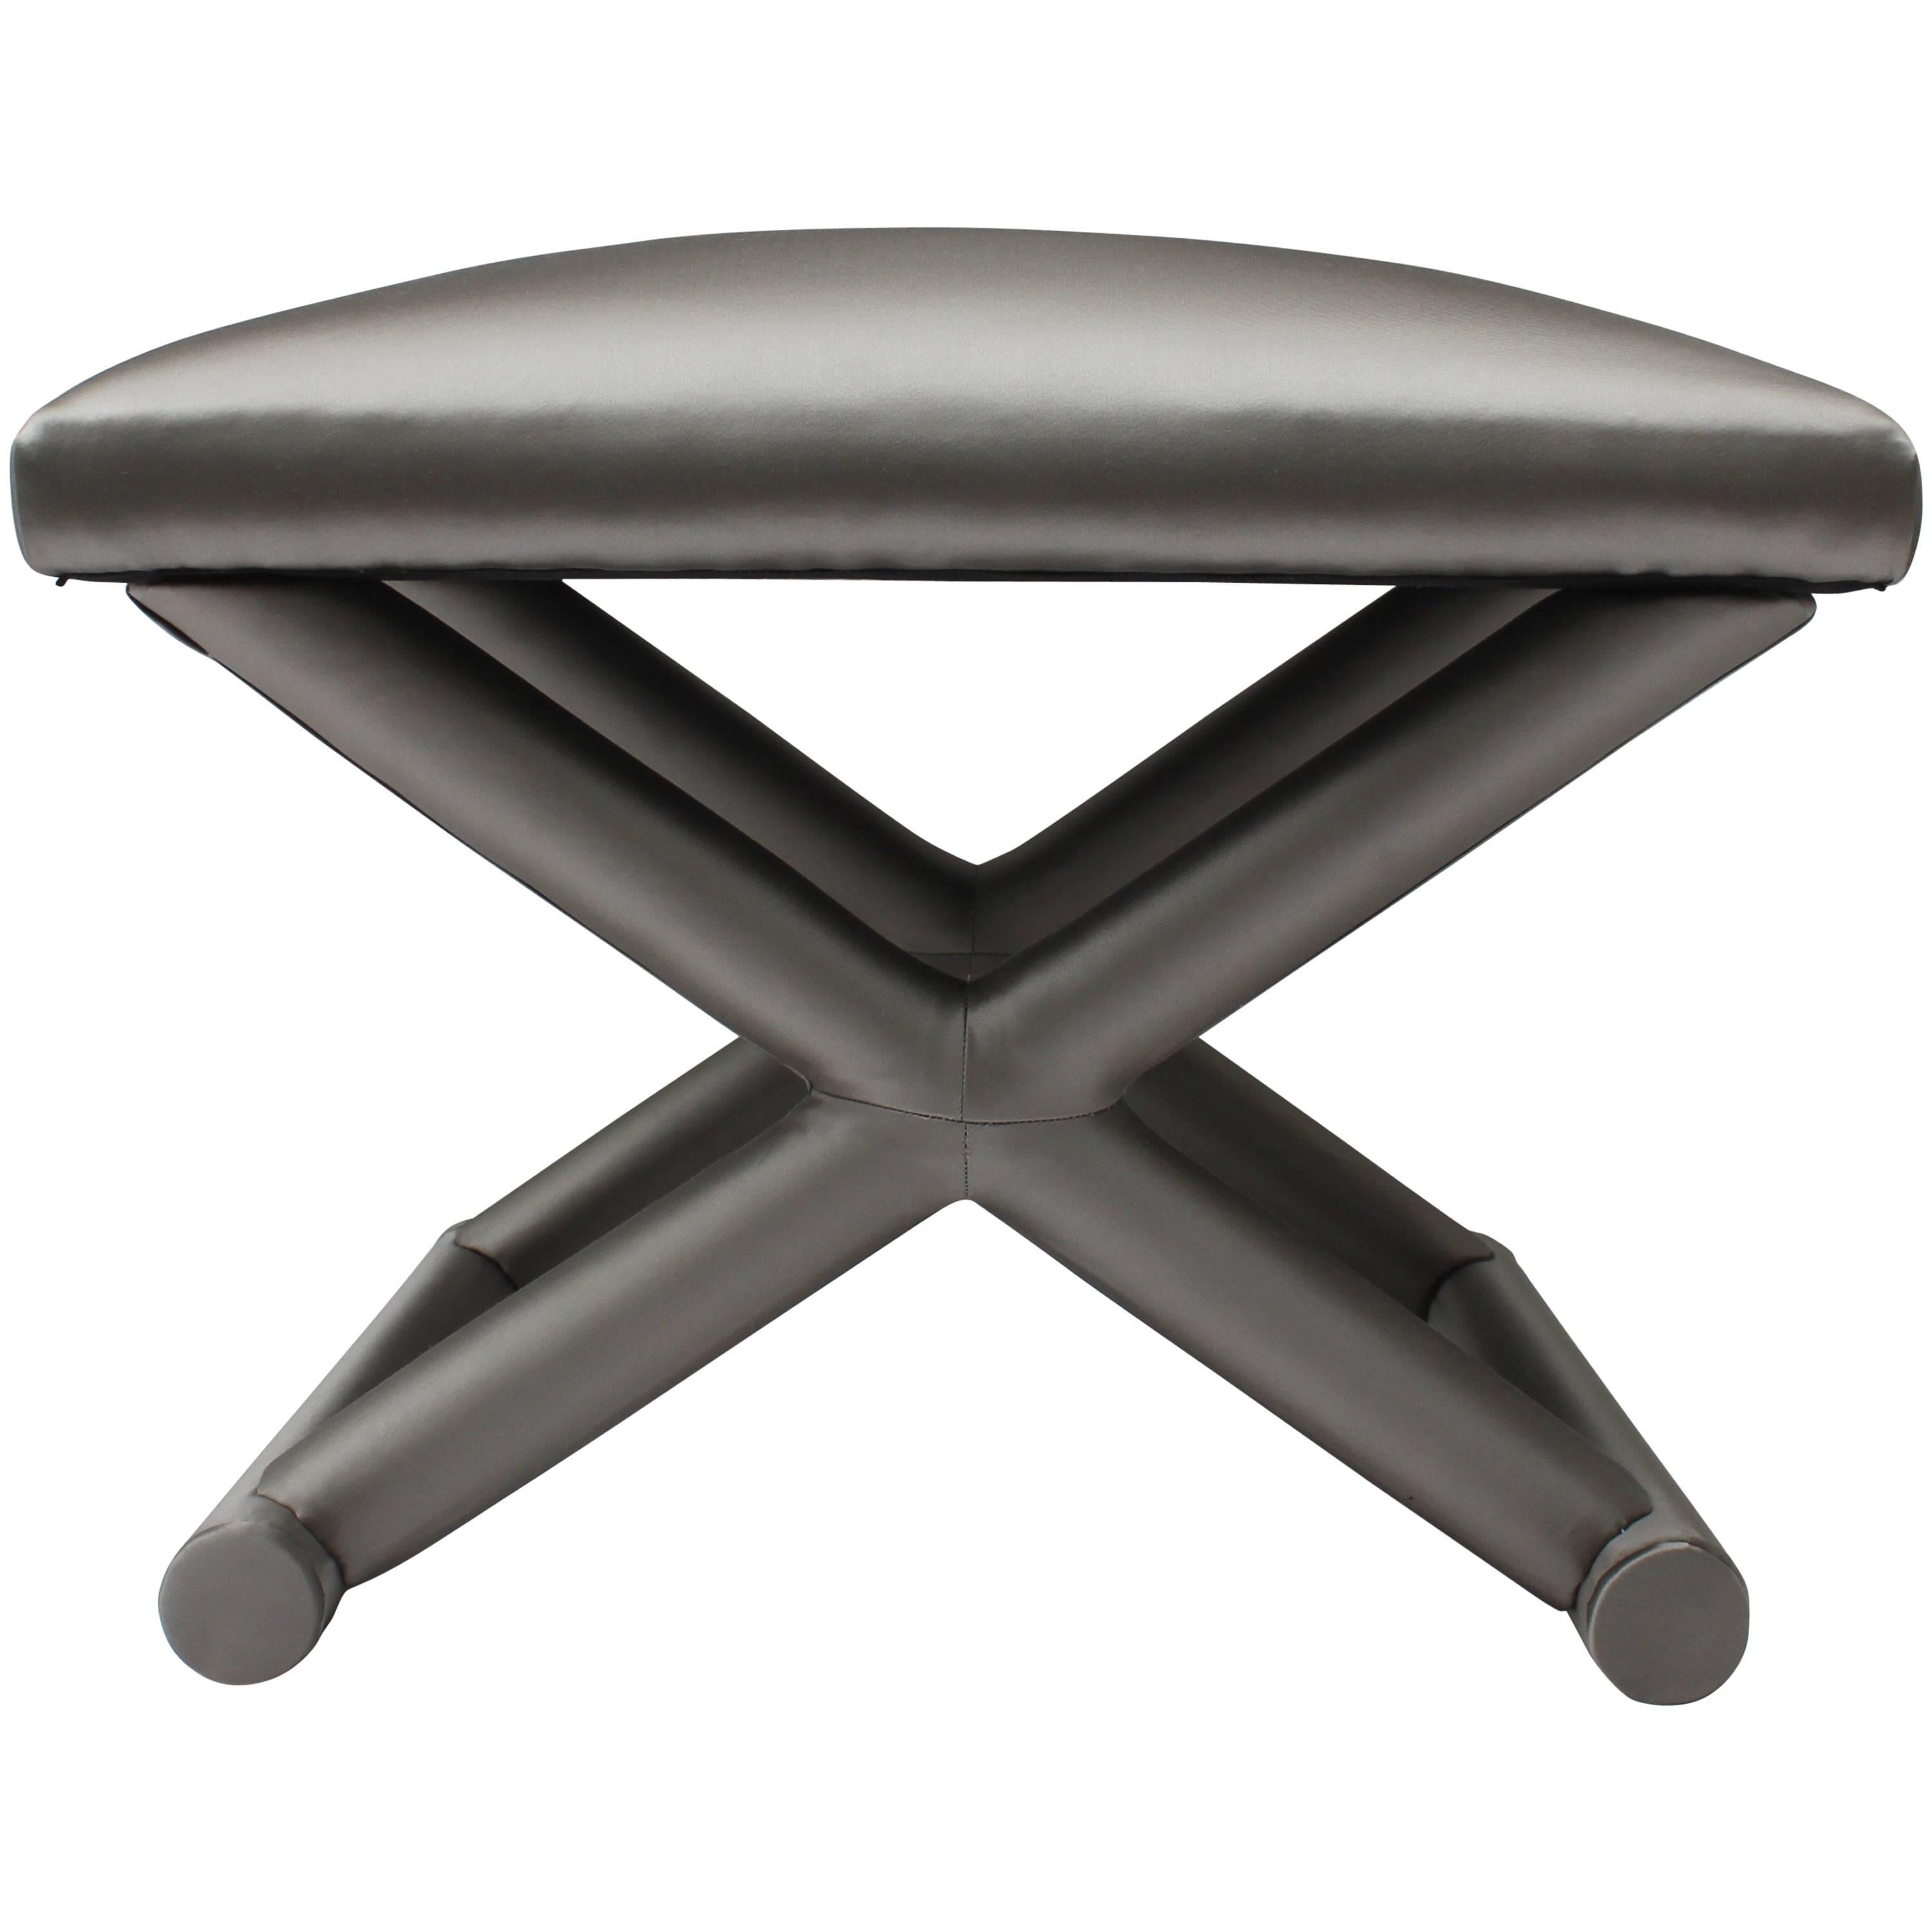 X-Form Upholstered Bench